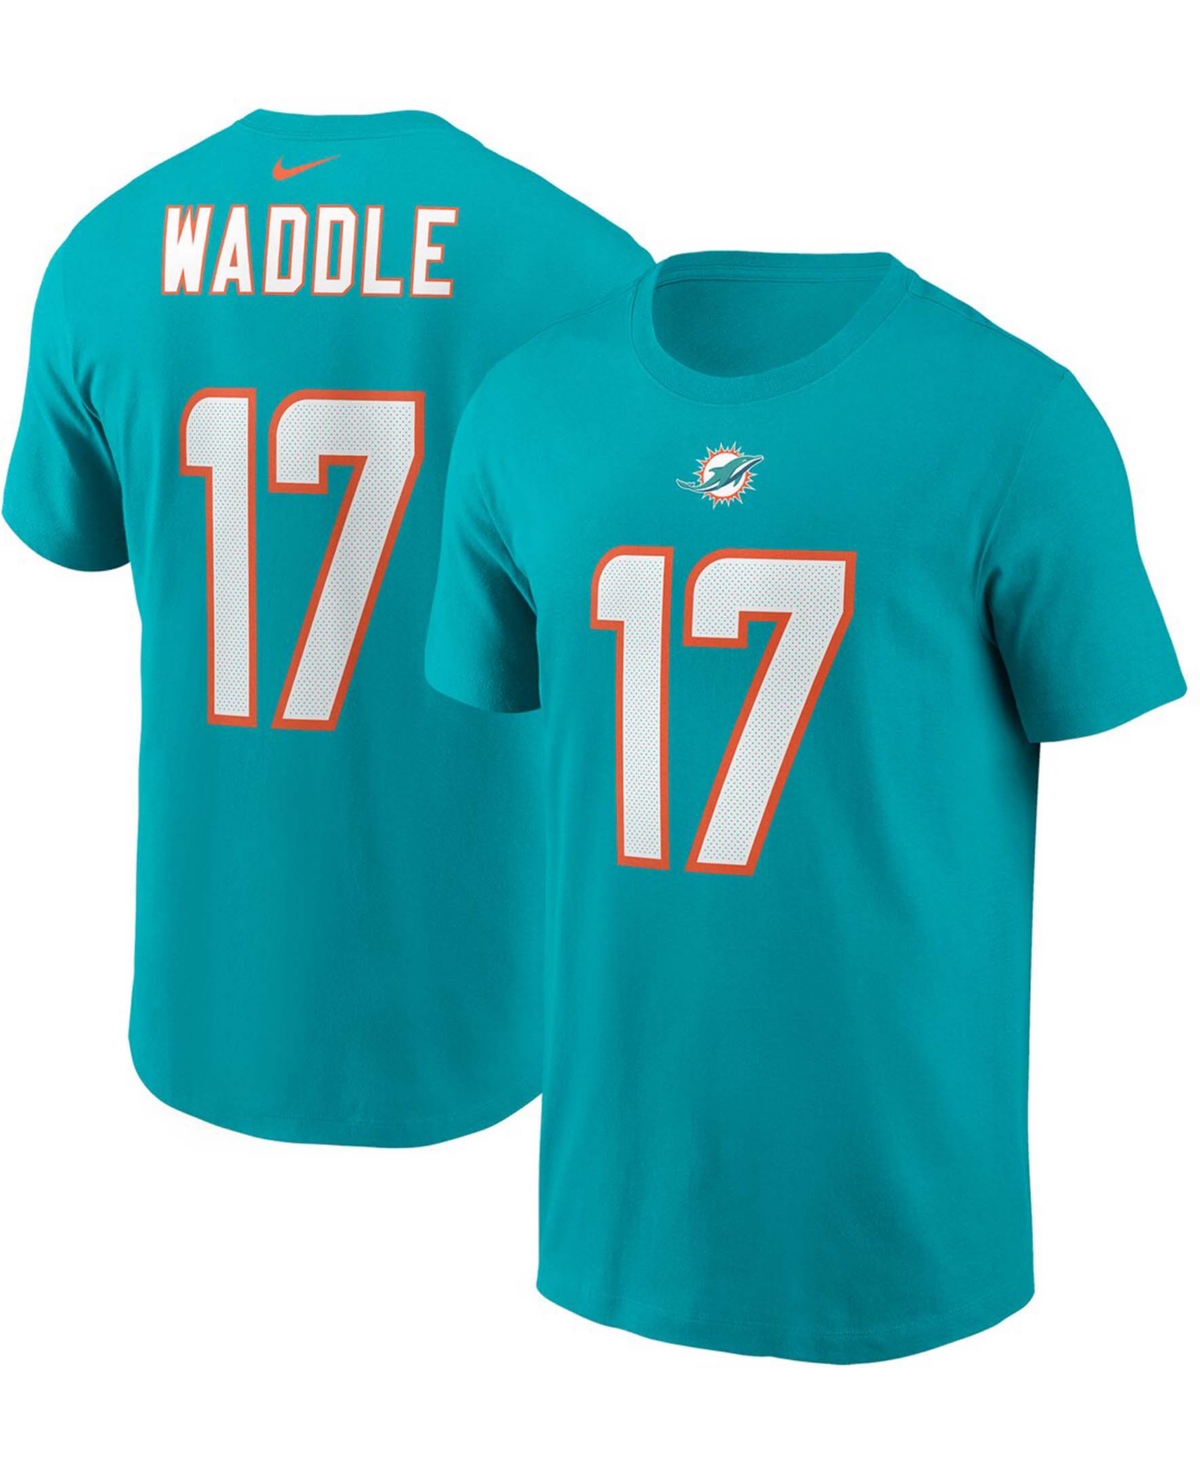 Nike Men's Jaylen Waddle Aqua Miami Dolphins Player Name And